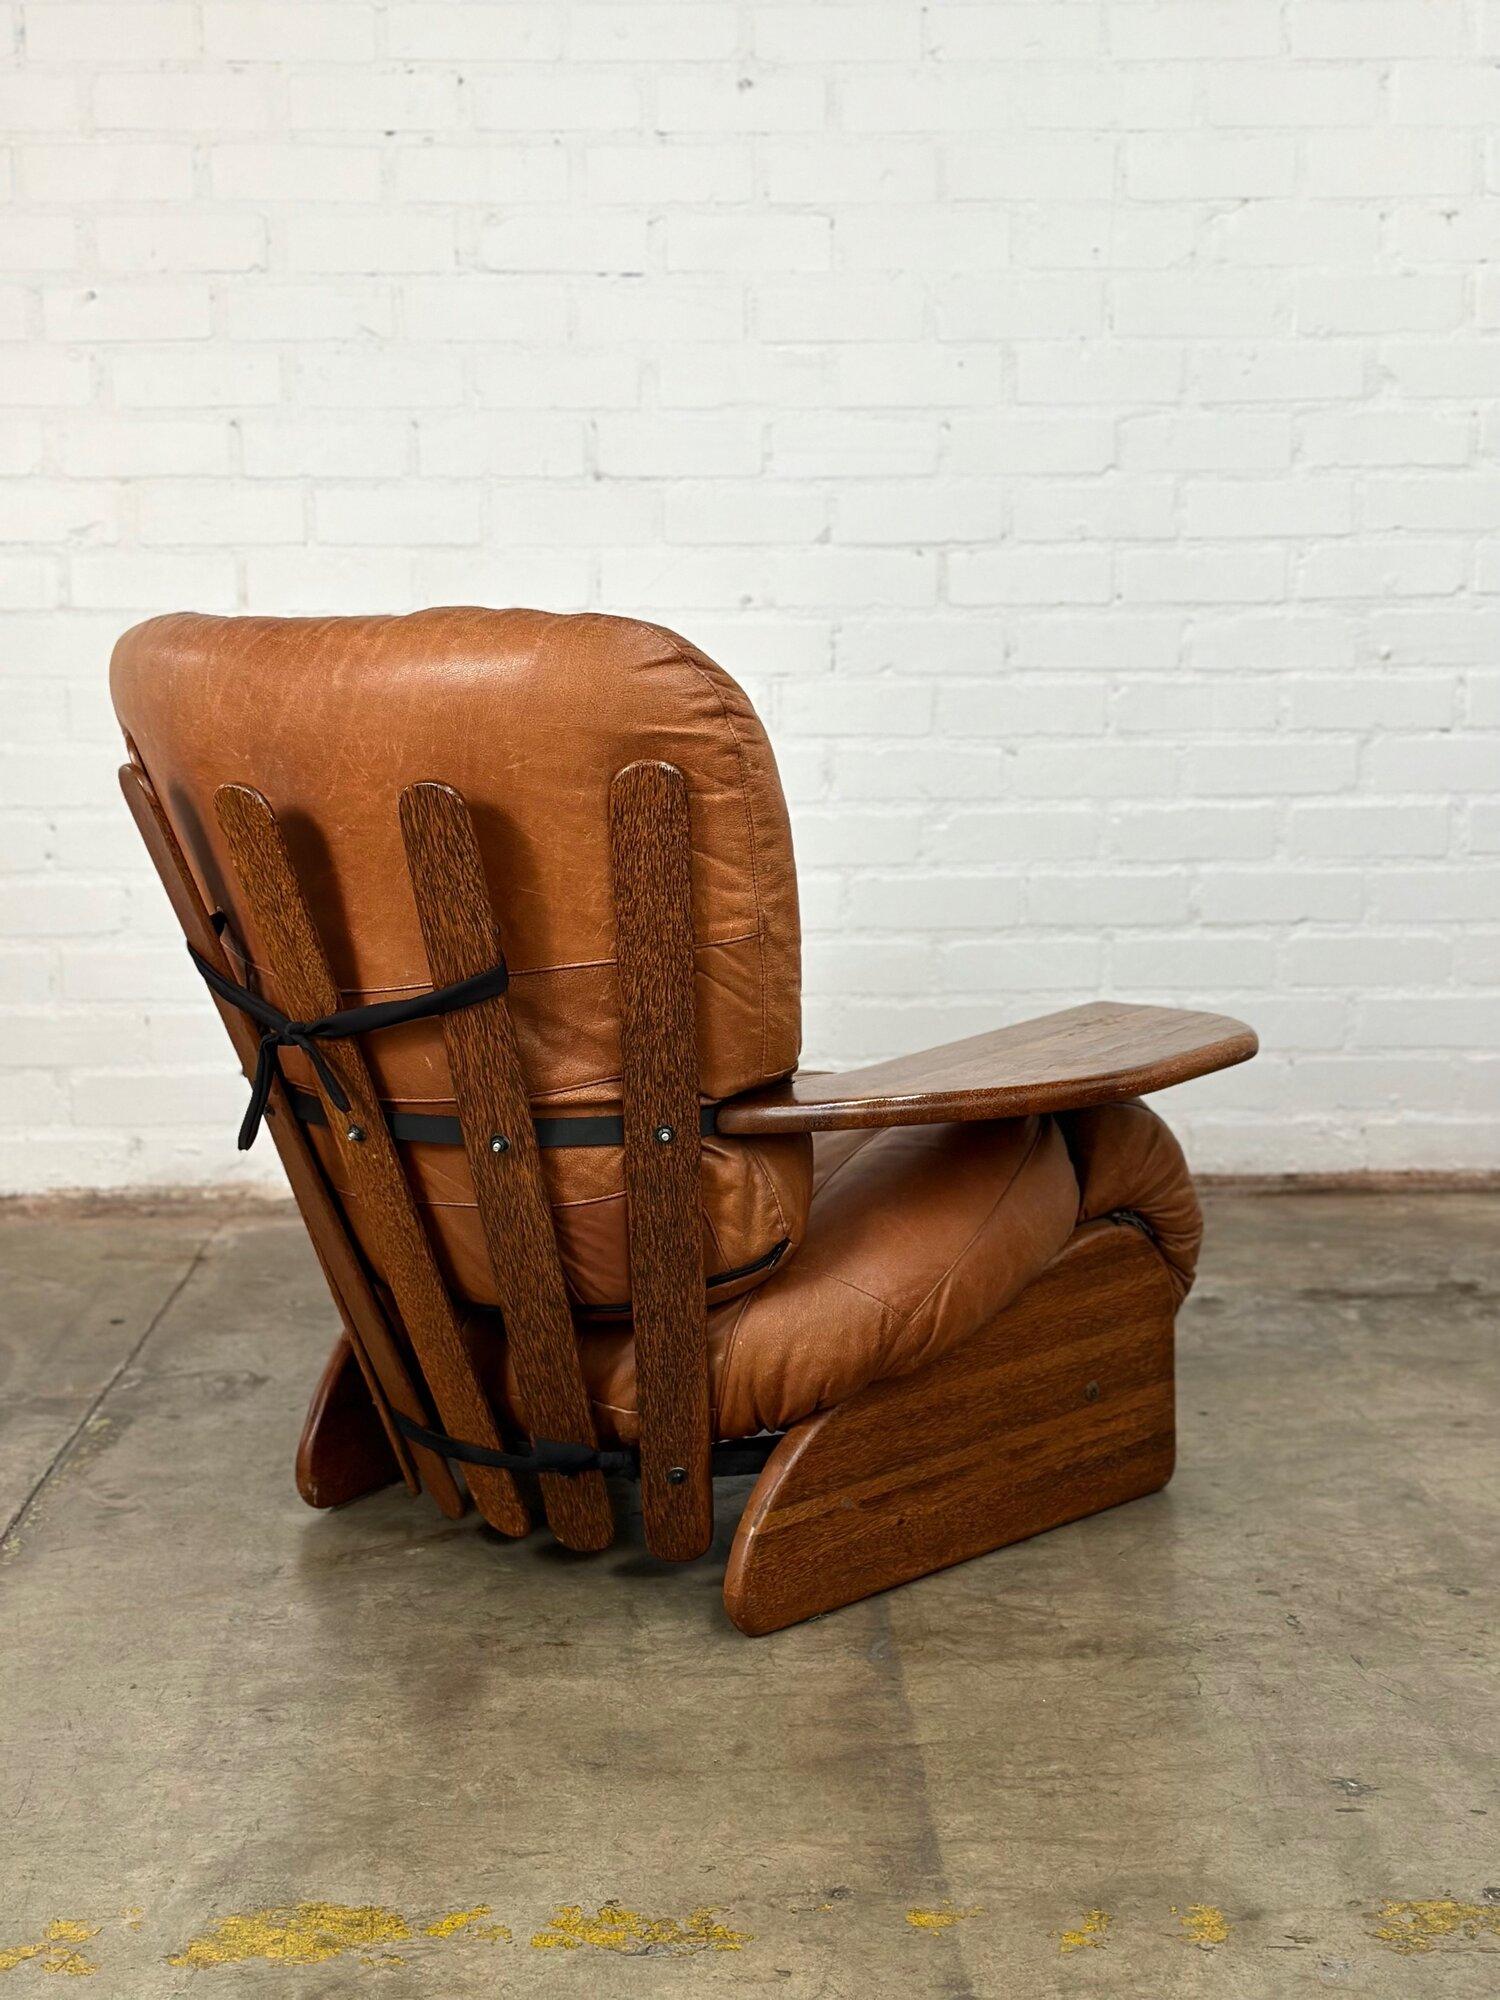 Measures: W42 D36 H37 SW24 SD22 SH16 AH21

Vintage lounge chair made in palm wood, constructed with metal to hold the shape of the interesting design along the back. Lounge chair is comfortable with a deep wide seat design. The leather is in great